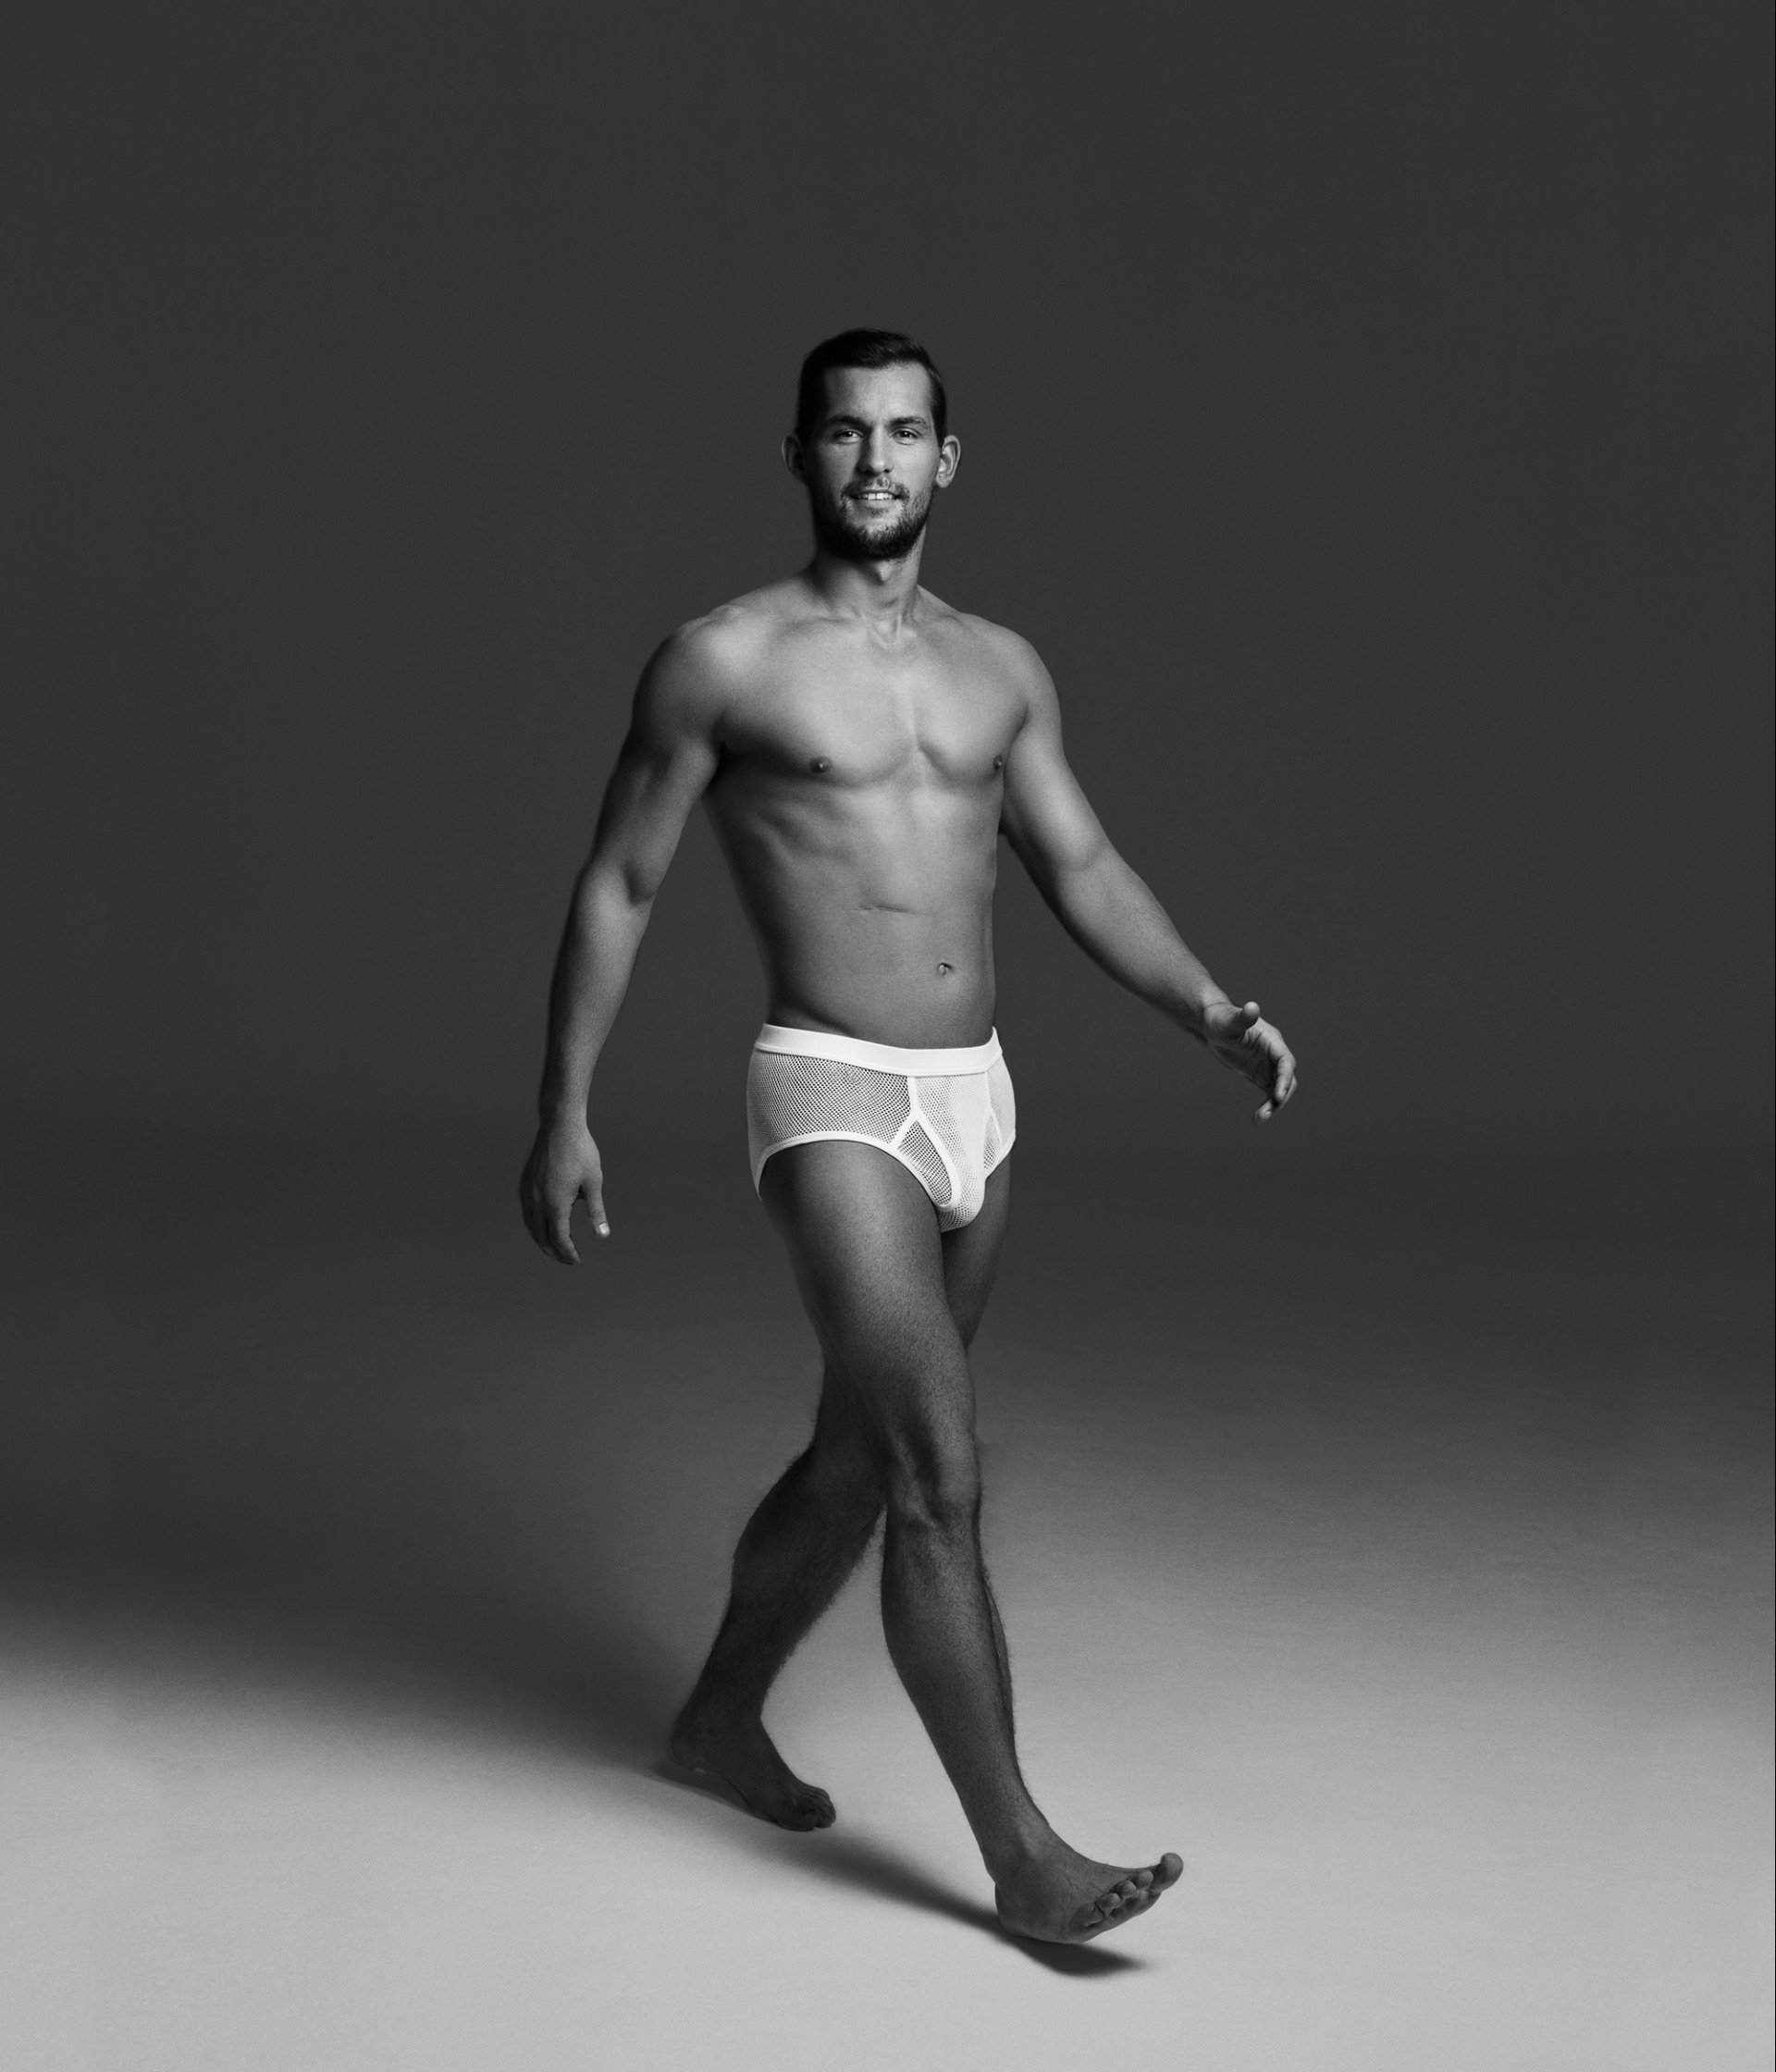 THE WHITE BRIEFS — NICK WOOSTER